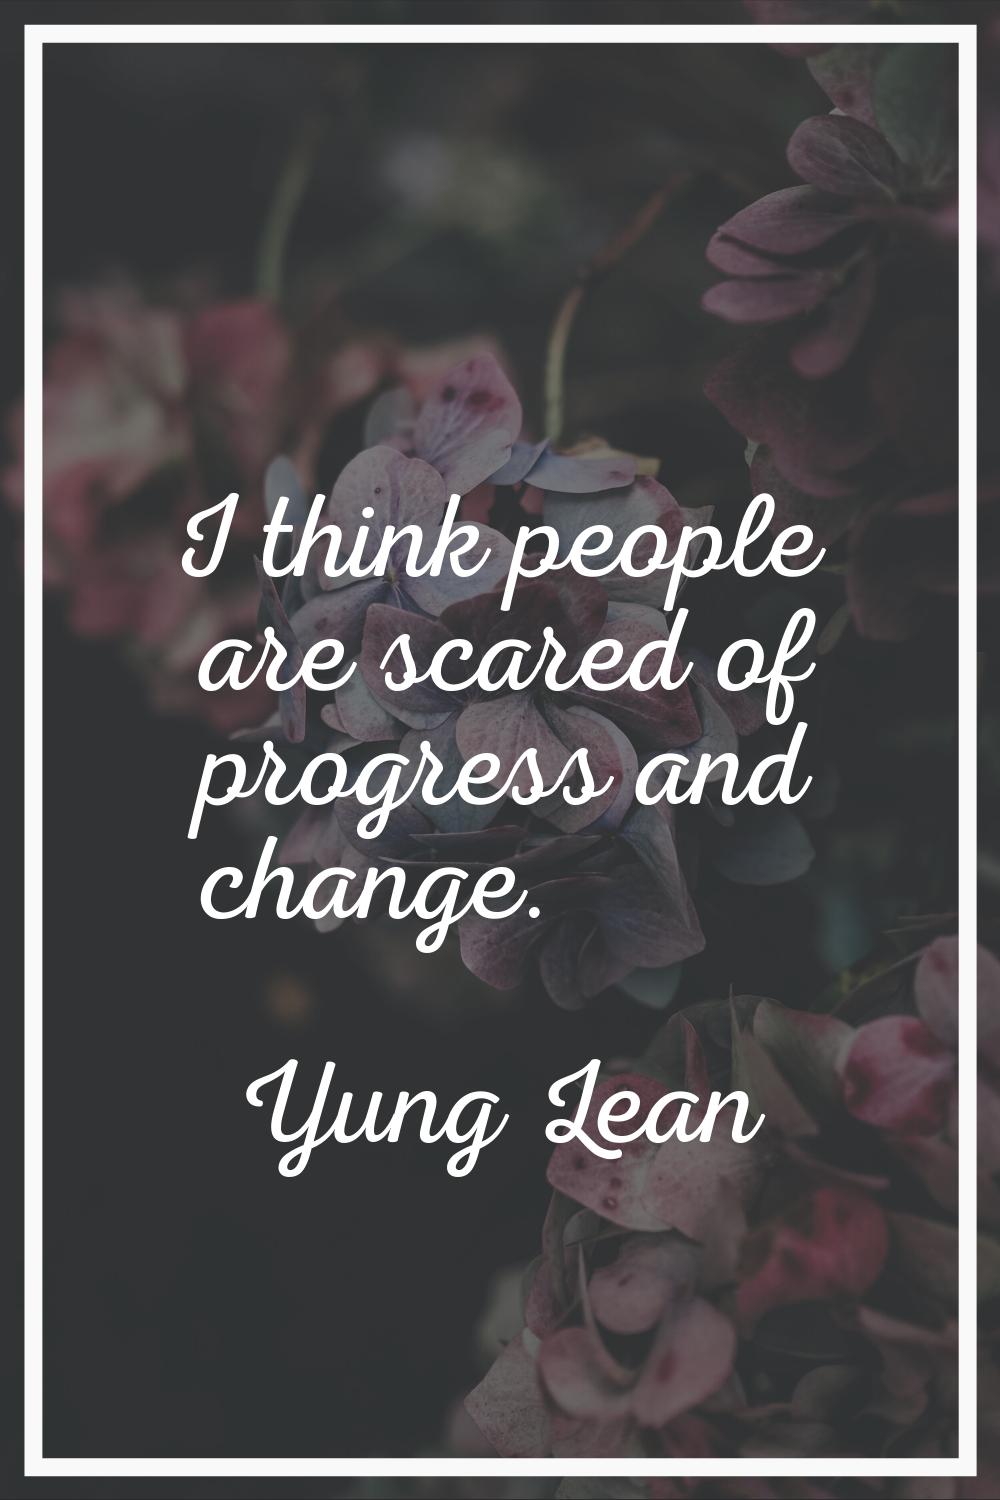 I think people are scared of progress and change.